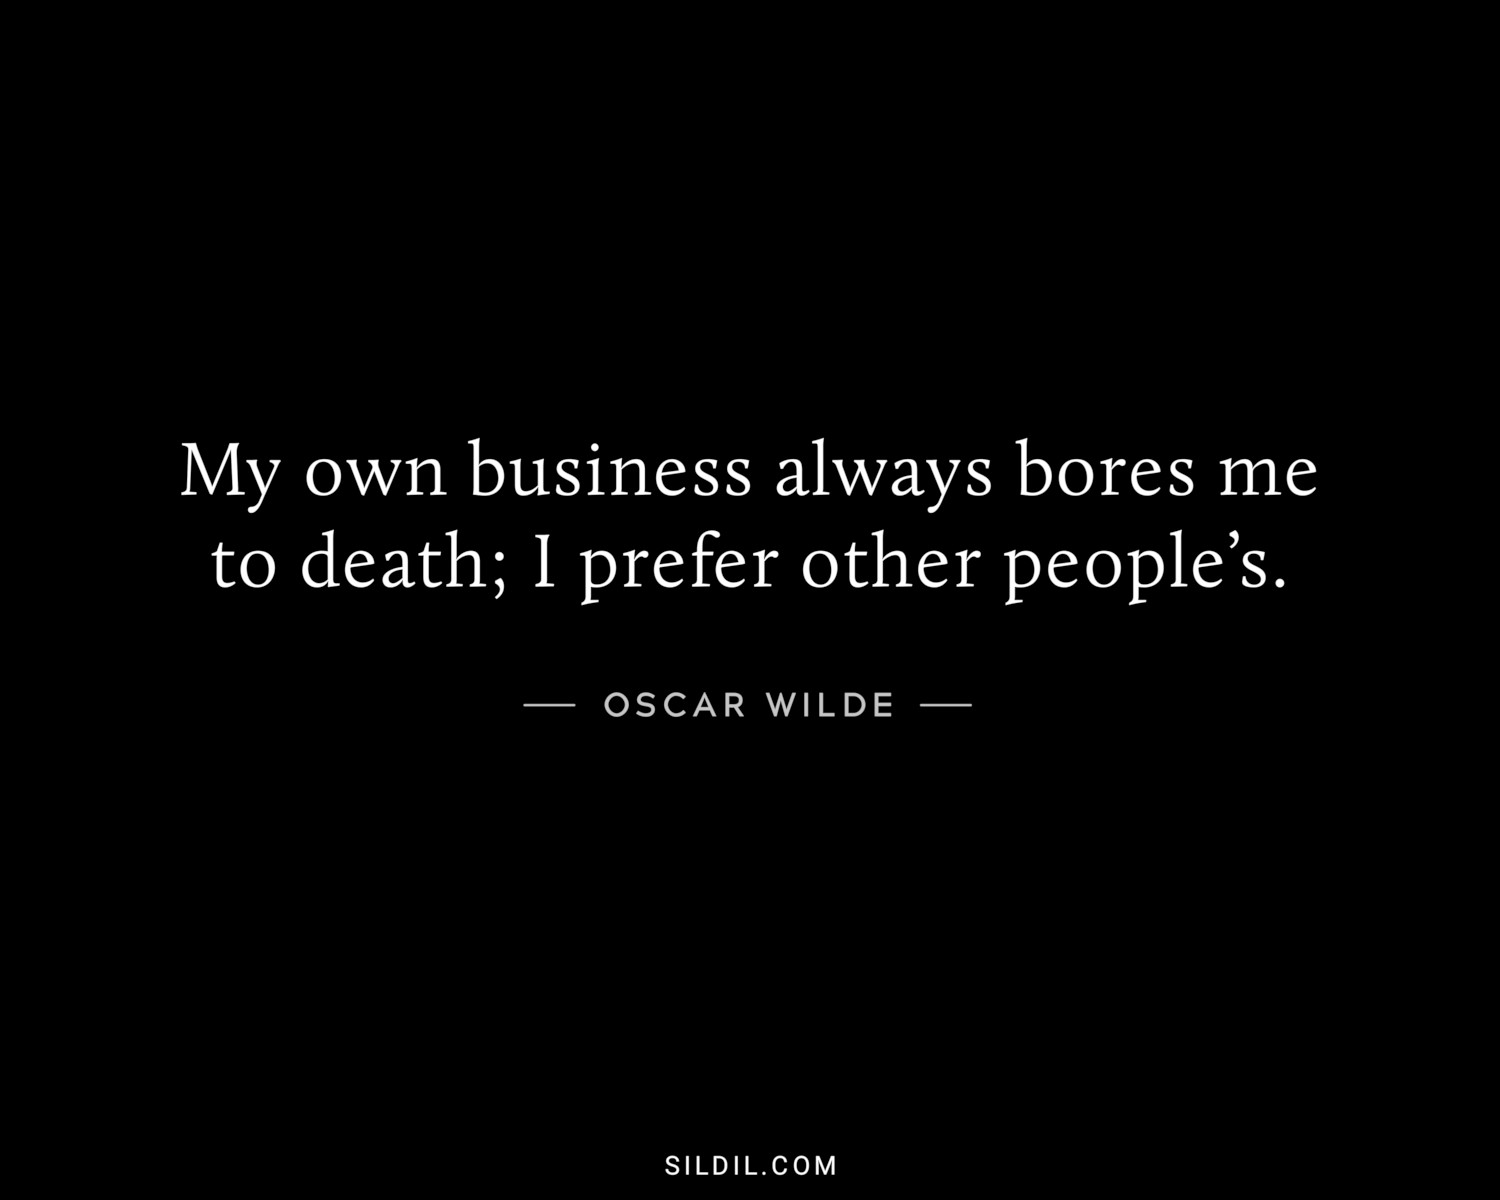 My own business always bores me to death; I prefer other people’s.